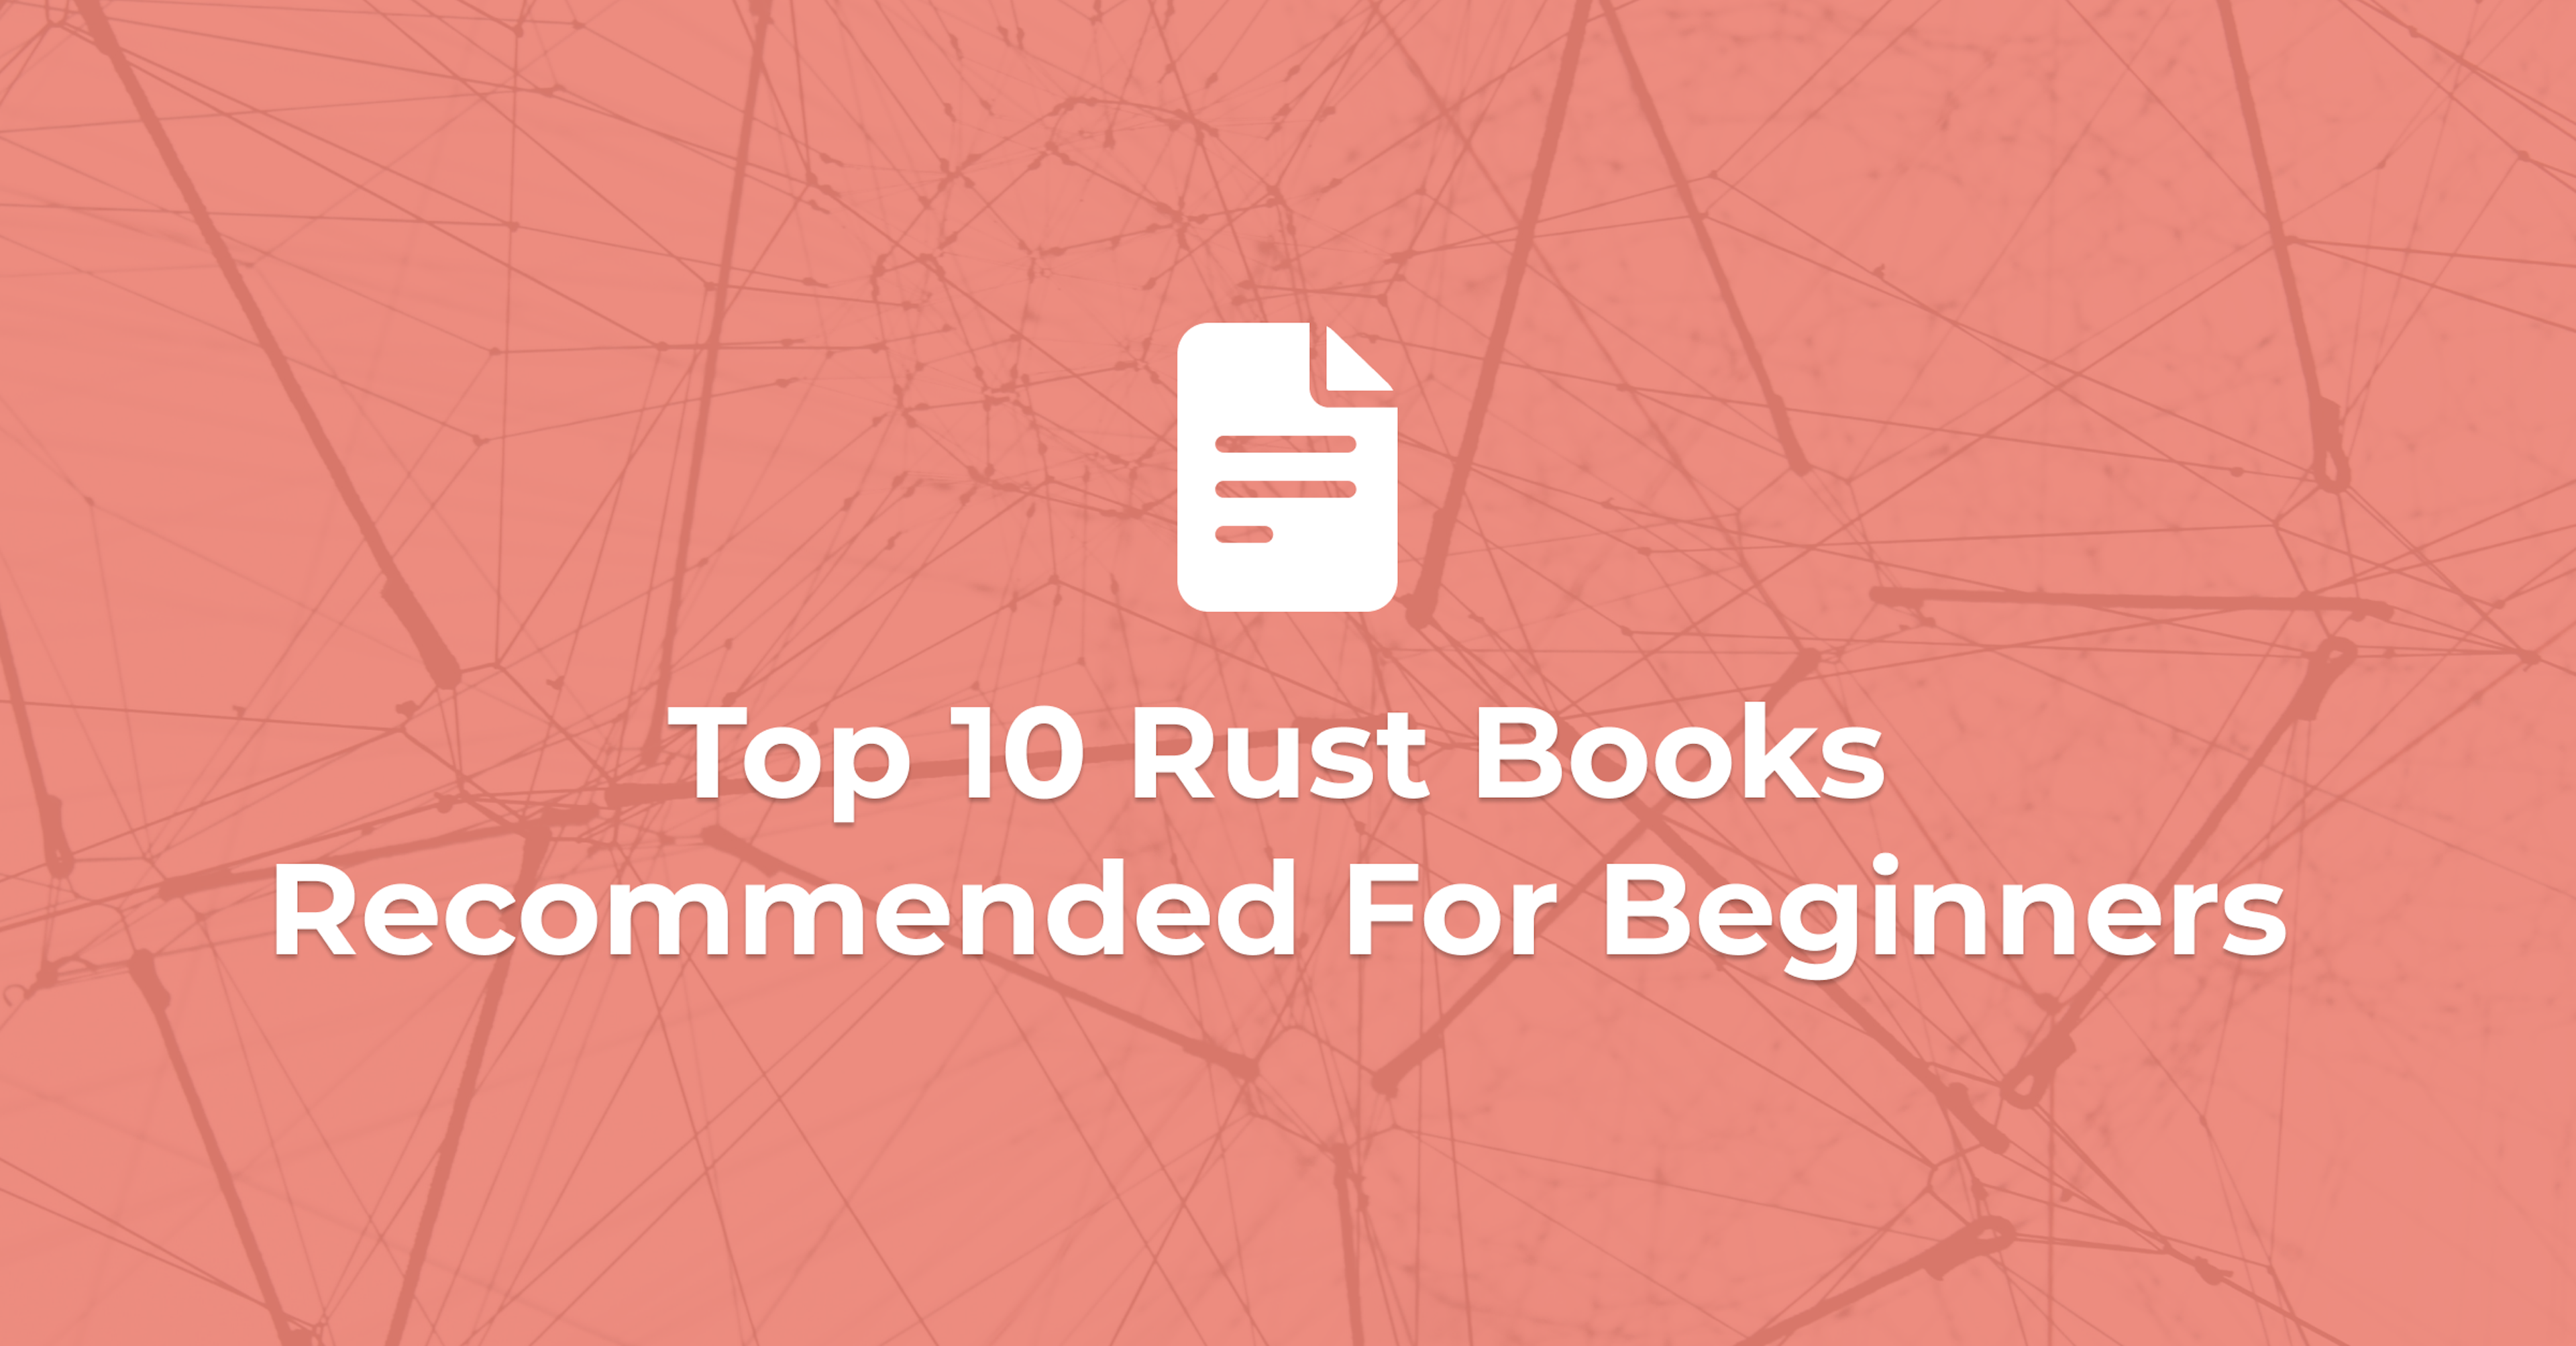 Top 10 Rust Books Recommended For Beginners